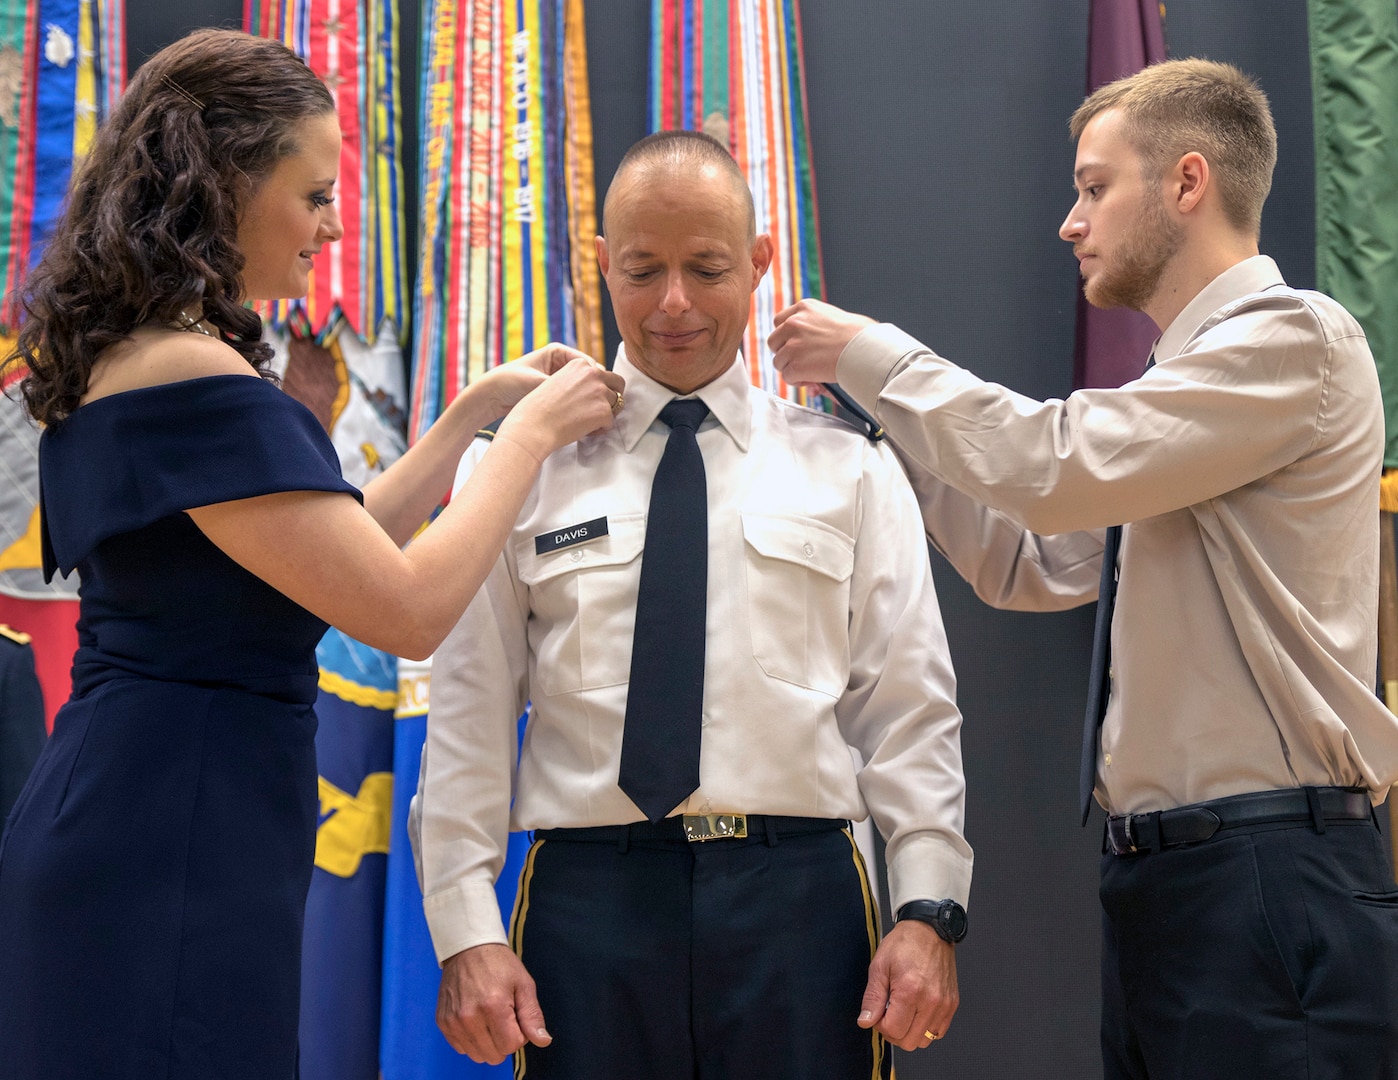 Brig. Gen. Jack Davis' children, Katie and Jacob, place his new rank on his dress shirt during his promotion ceremony in METC’s Anderson Hall Auditorium at Joint Base San Antonio-Fort Sam Houston June 7.